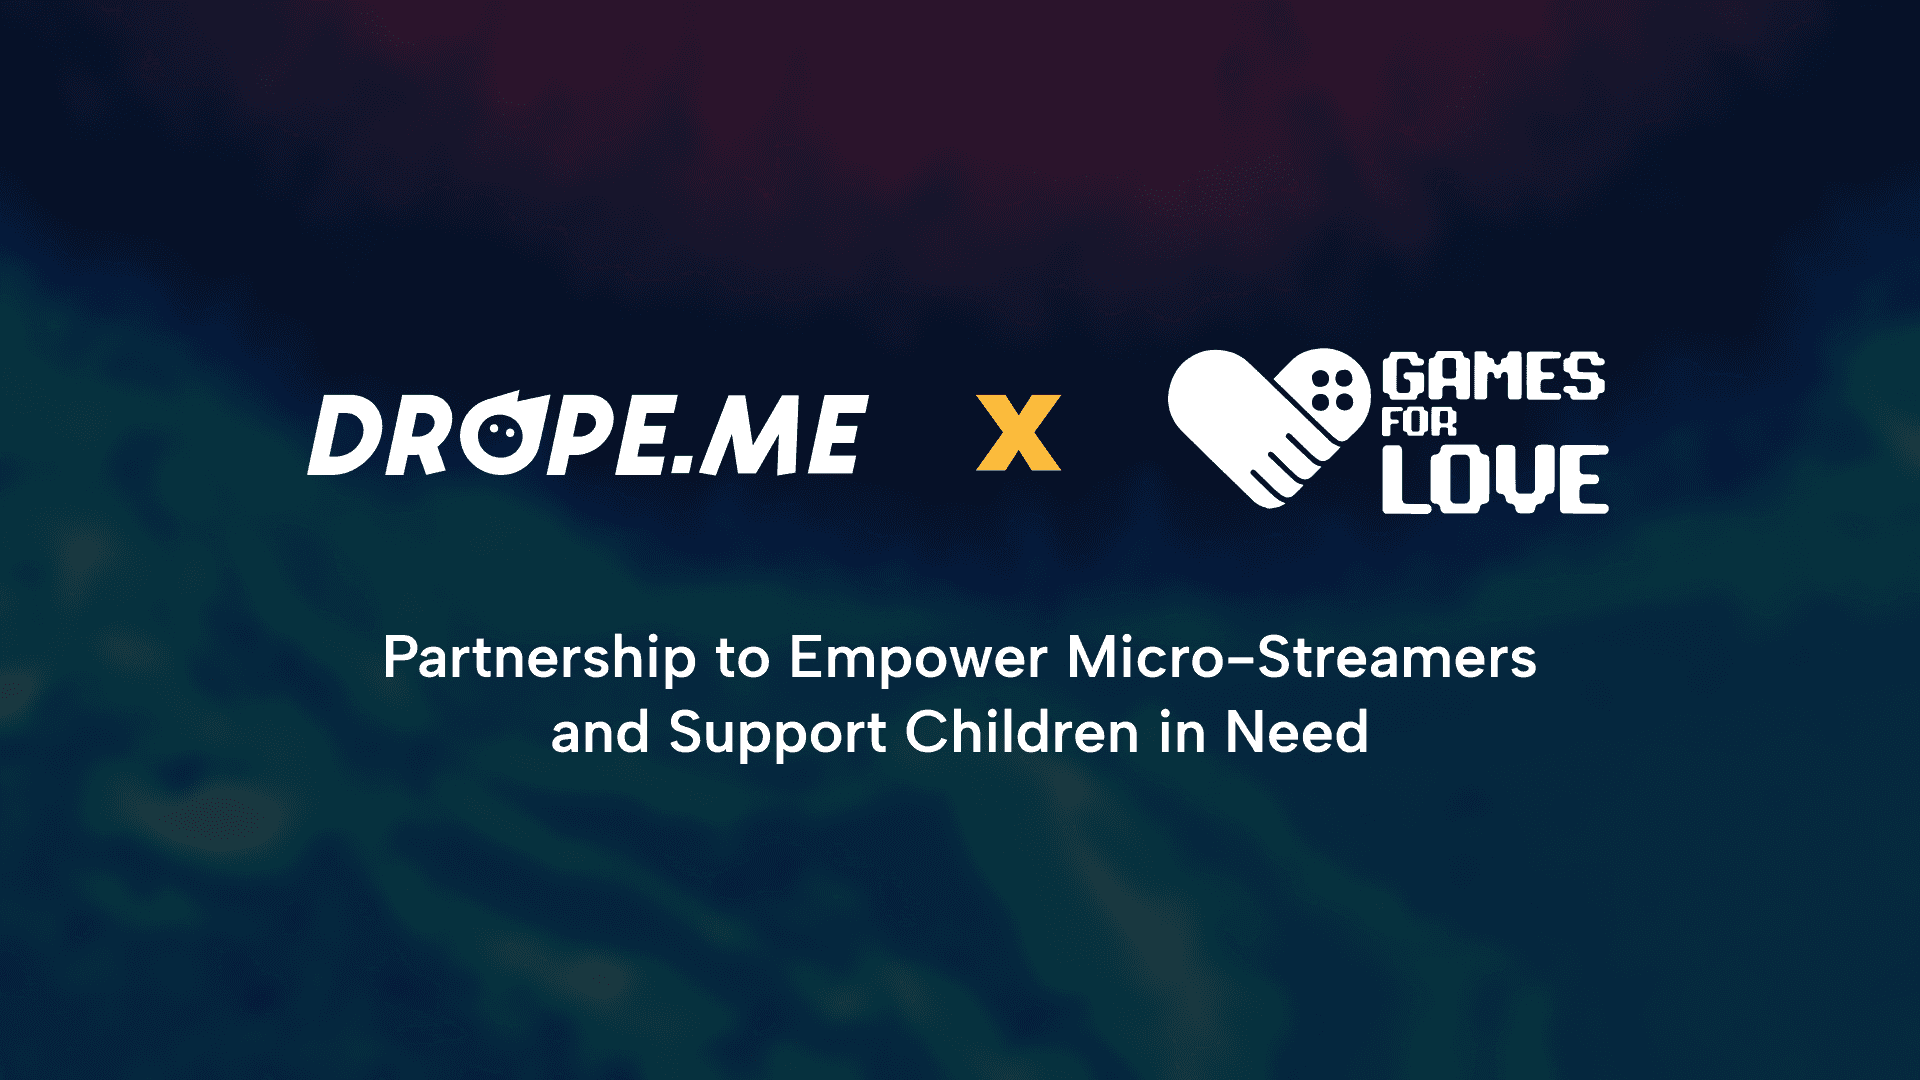 Games For Love and Drope.me Unite to Empower Micro-Streamers and Support Children in Need